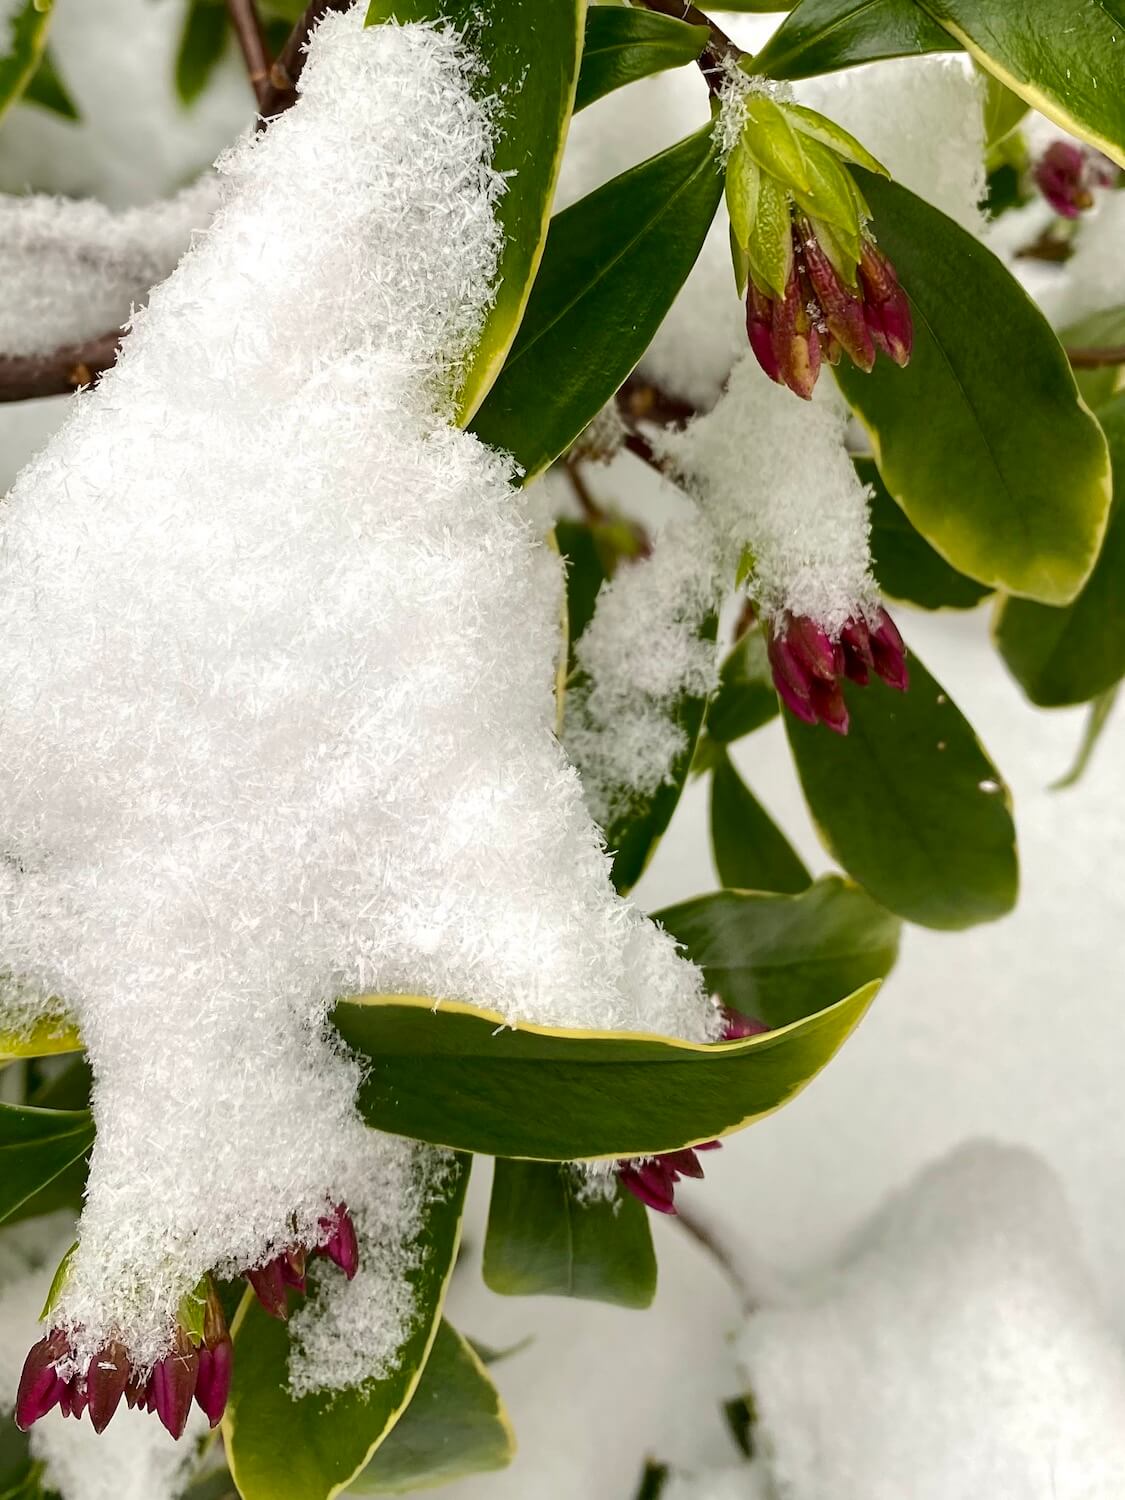 Snow crystals pile up on a budding Daphne bloom, making it's way to push through the snow. The green leaves are light yellow on the ends.